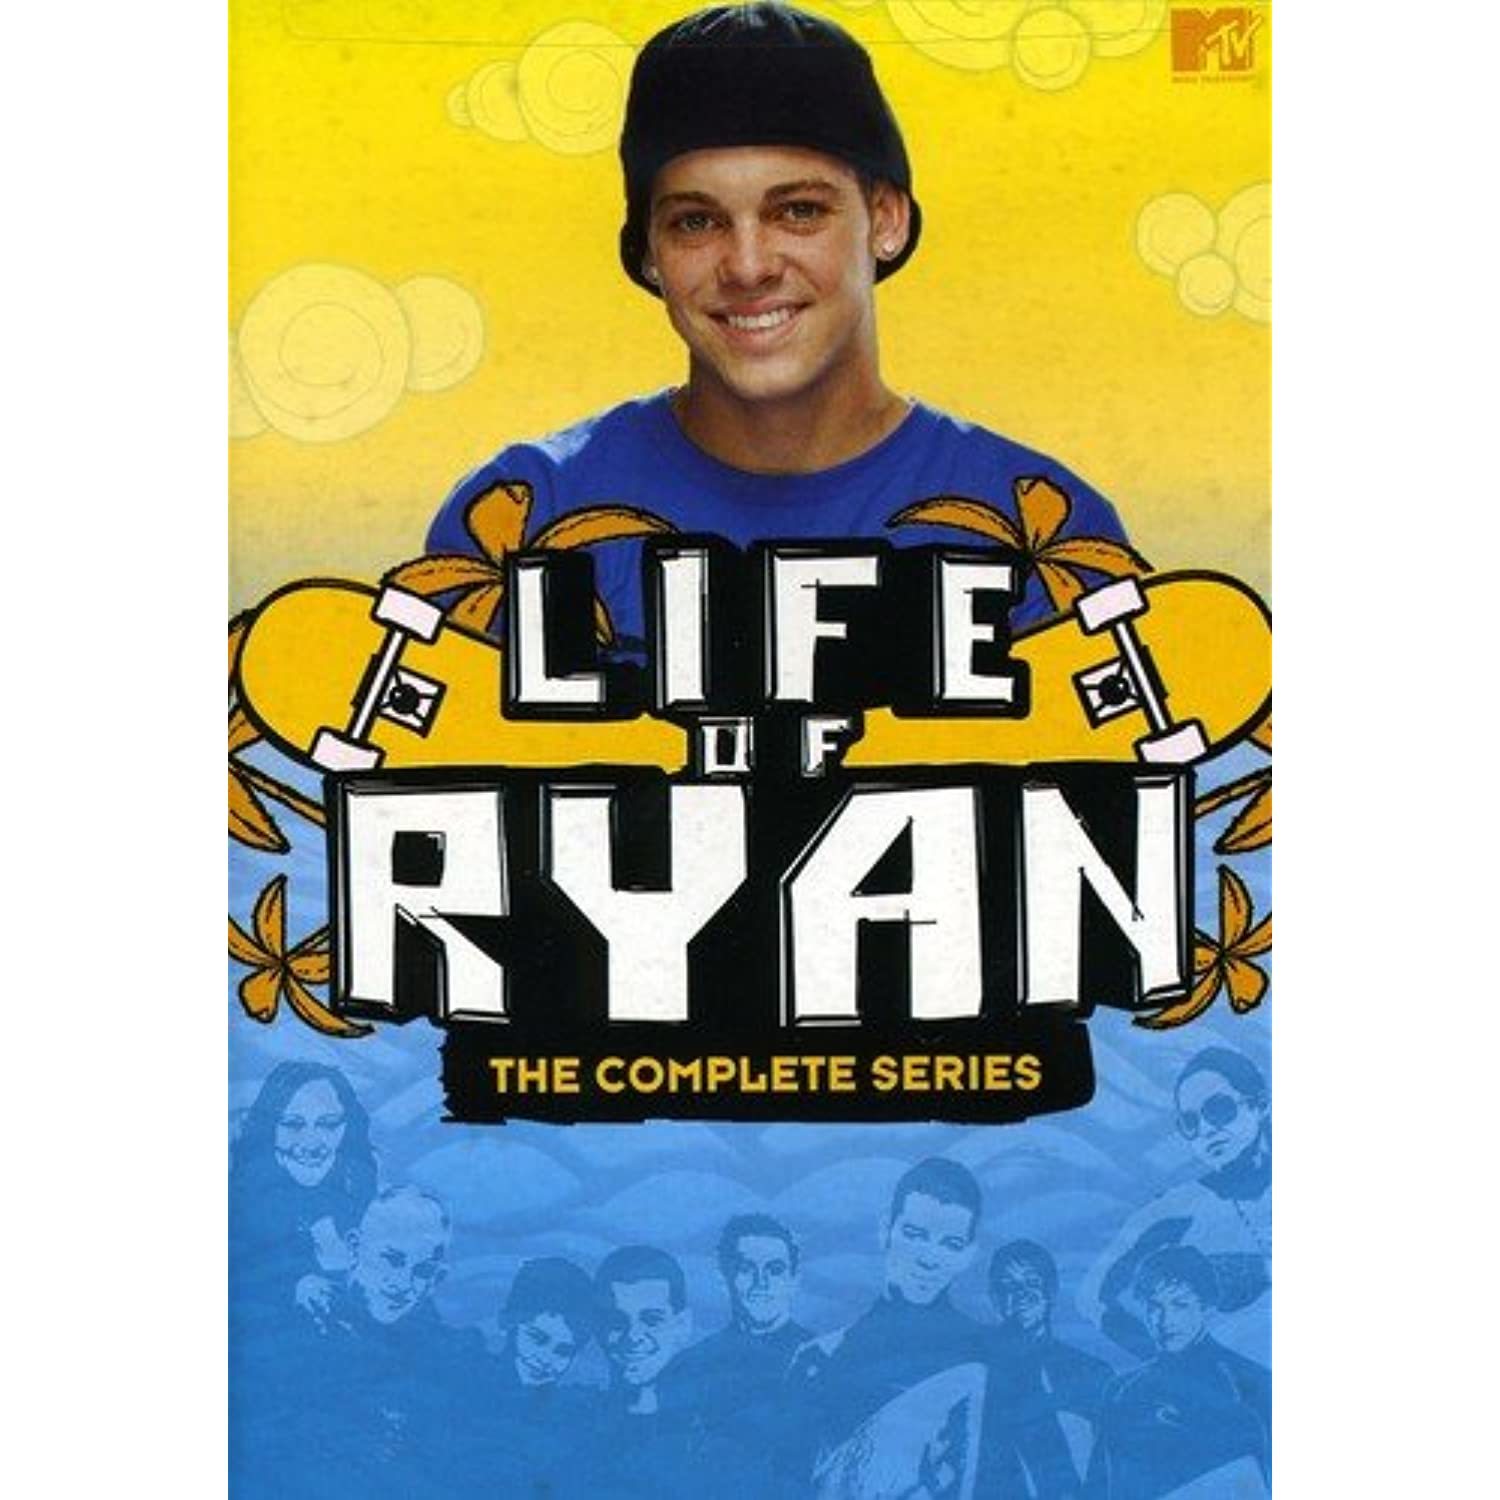 Life Of Ryan: The Complete Series